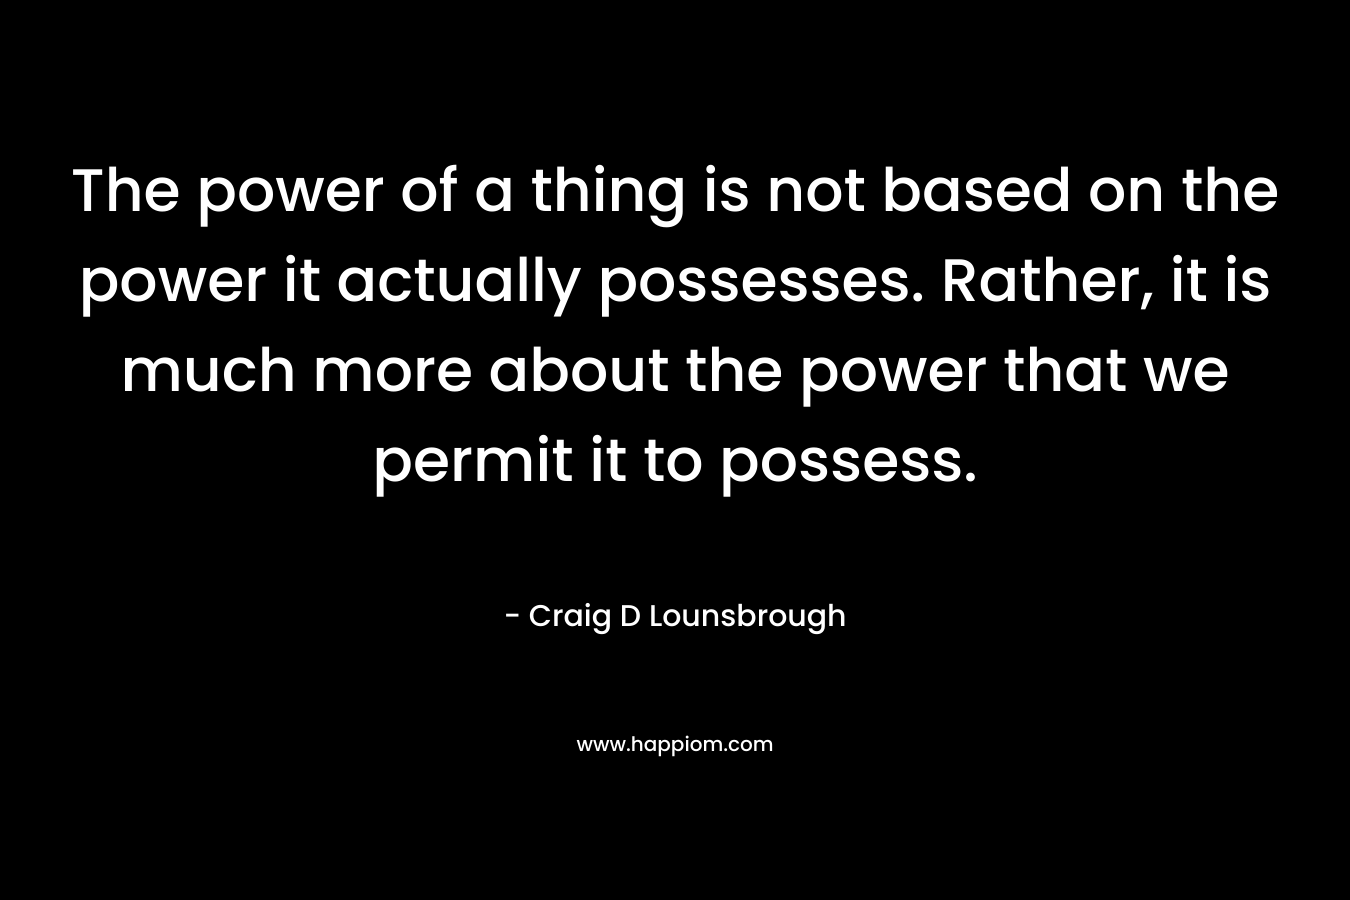 The power of a thing is not based on the power it actually possesses. Rather, it is much more about the power that we permit it to possess.